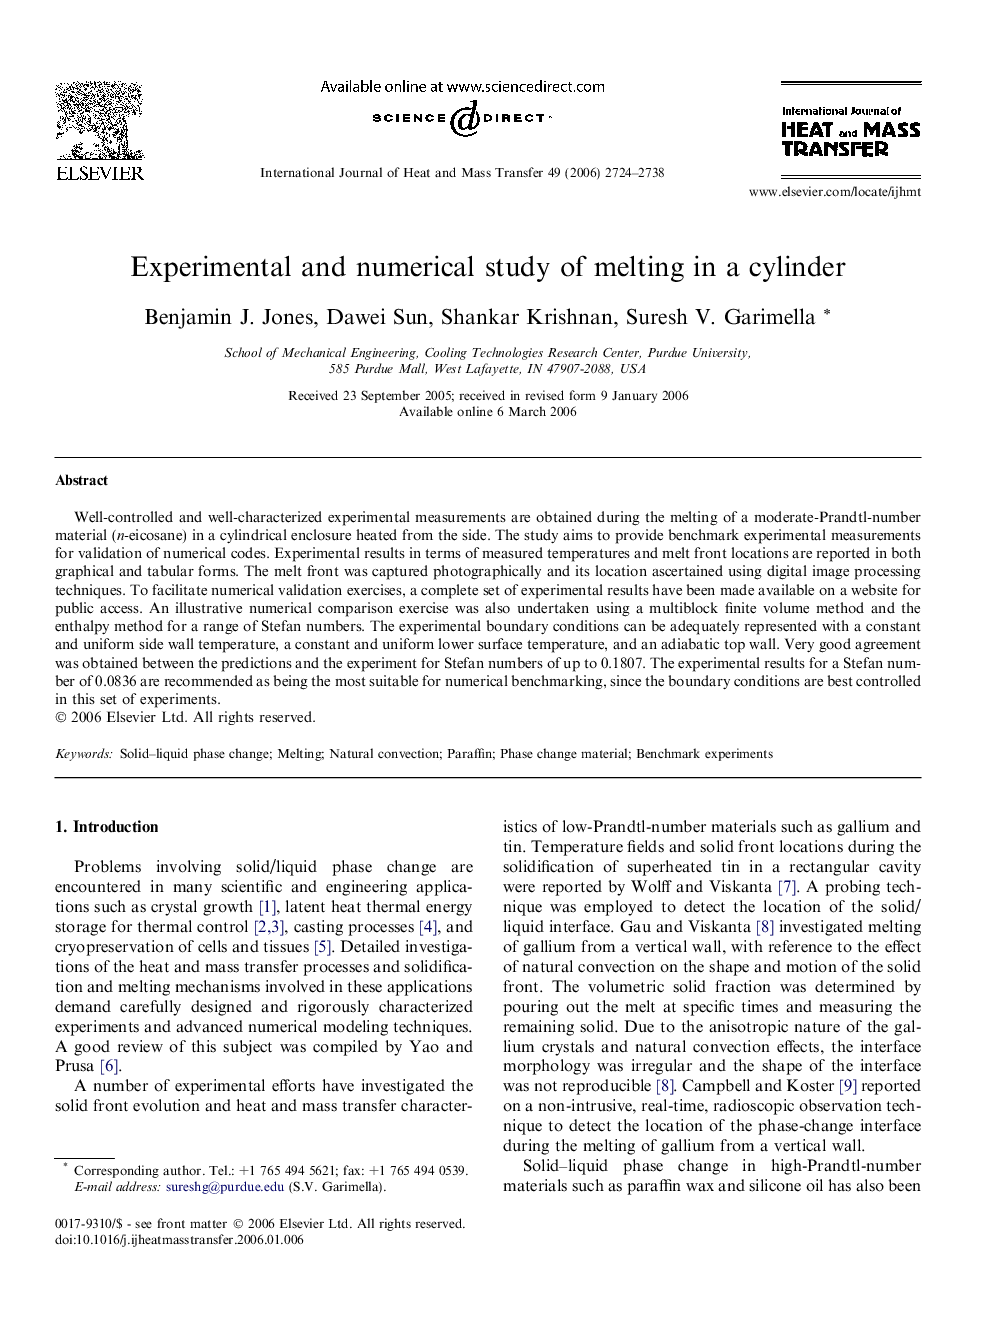 Experimental and numerical study of melting in a cylinder